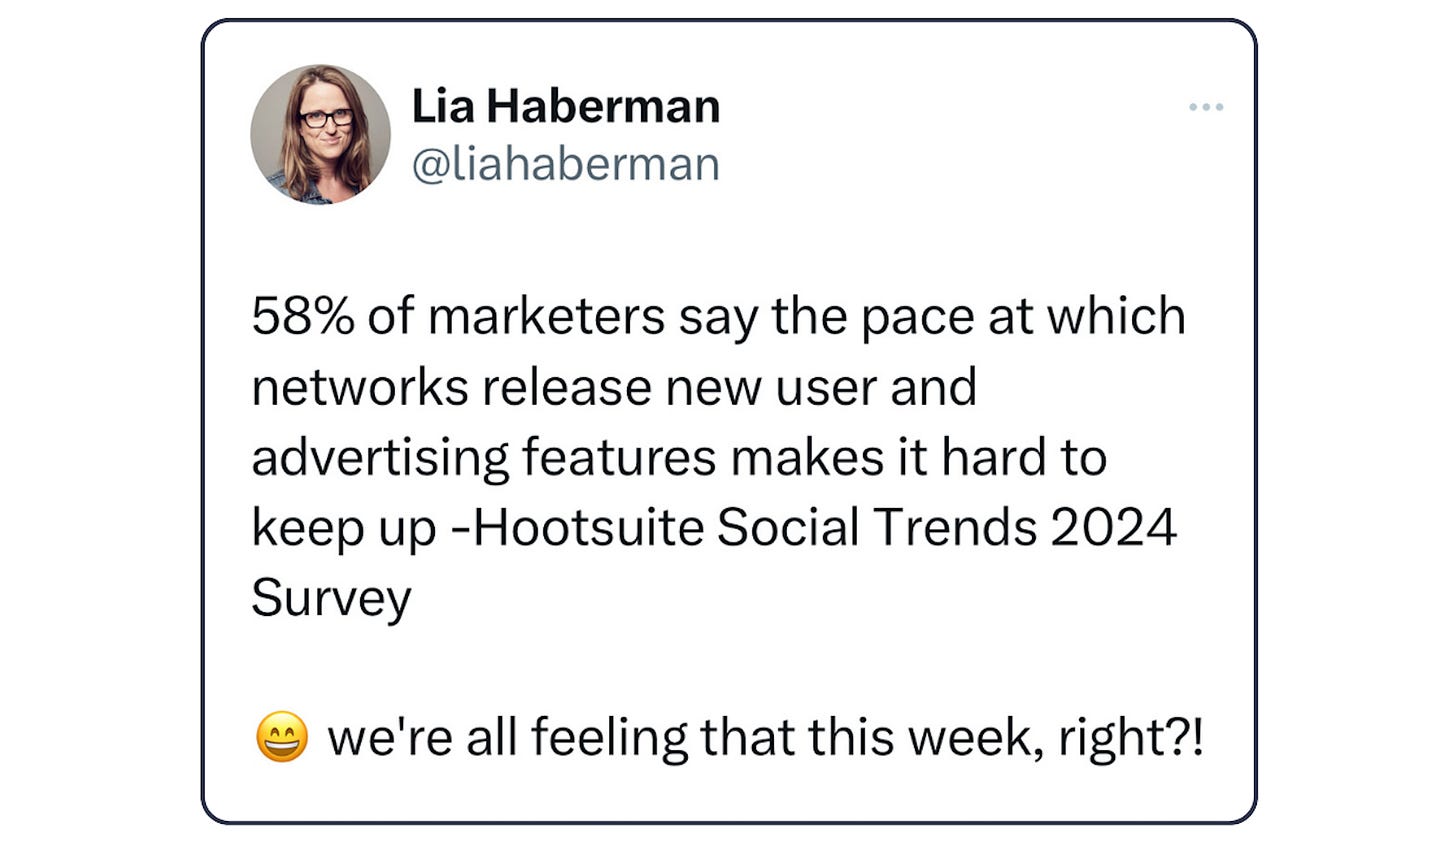 Tweet from Lia Haberman that says: 58% of marketers say the pace at which networks release new user and advertising features makes it hard to keep up -Hootsuite Social Trends 2024 Survey. We're all feeling that this week, right?!